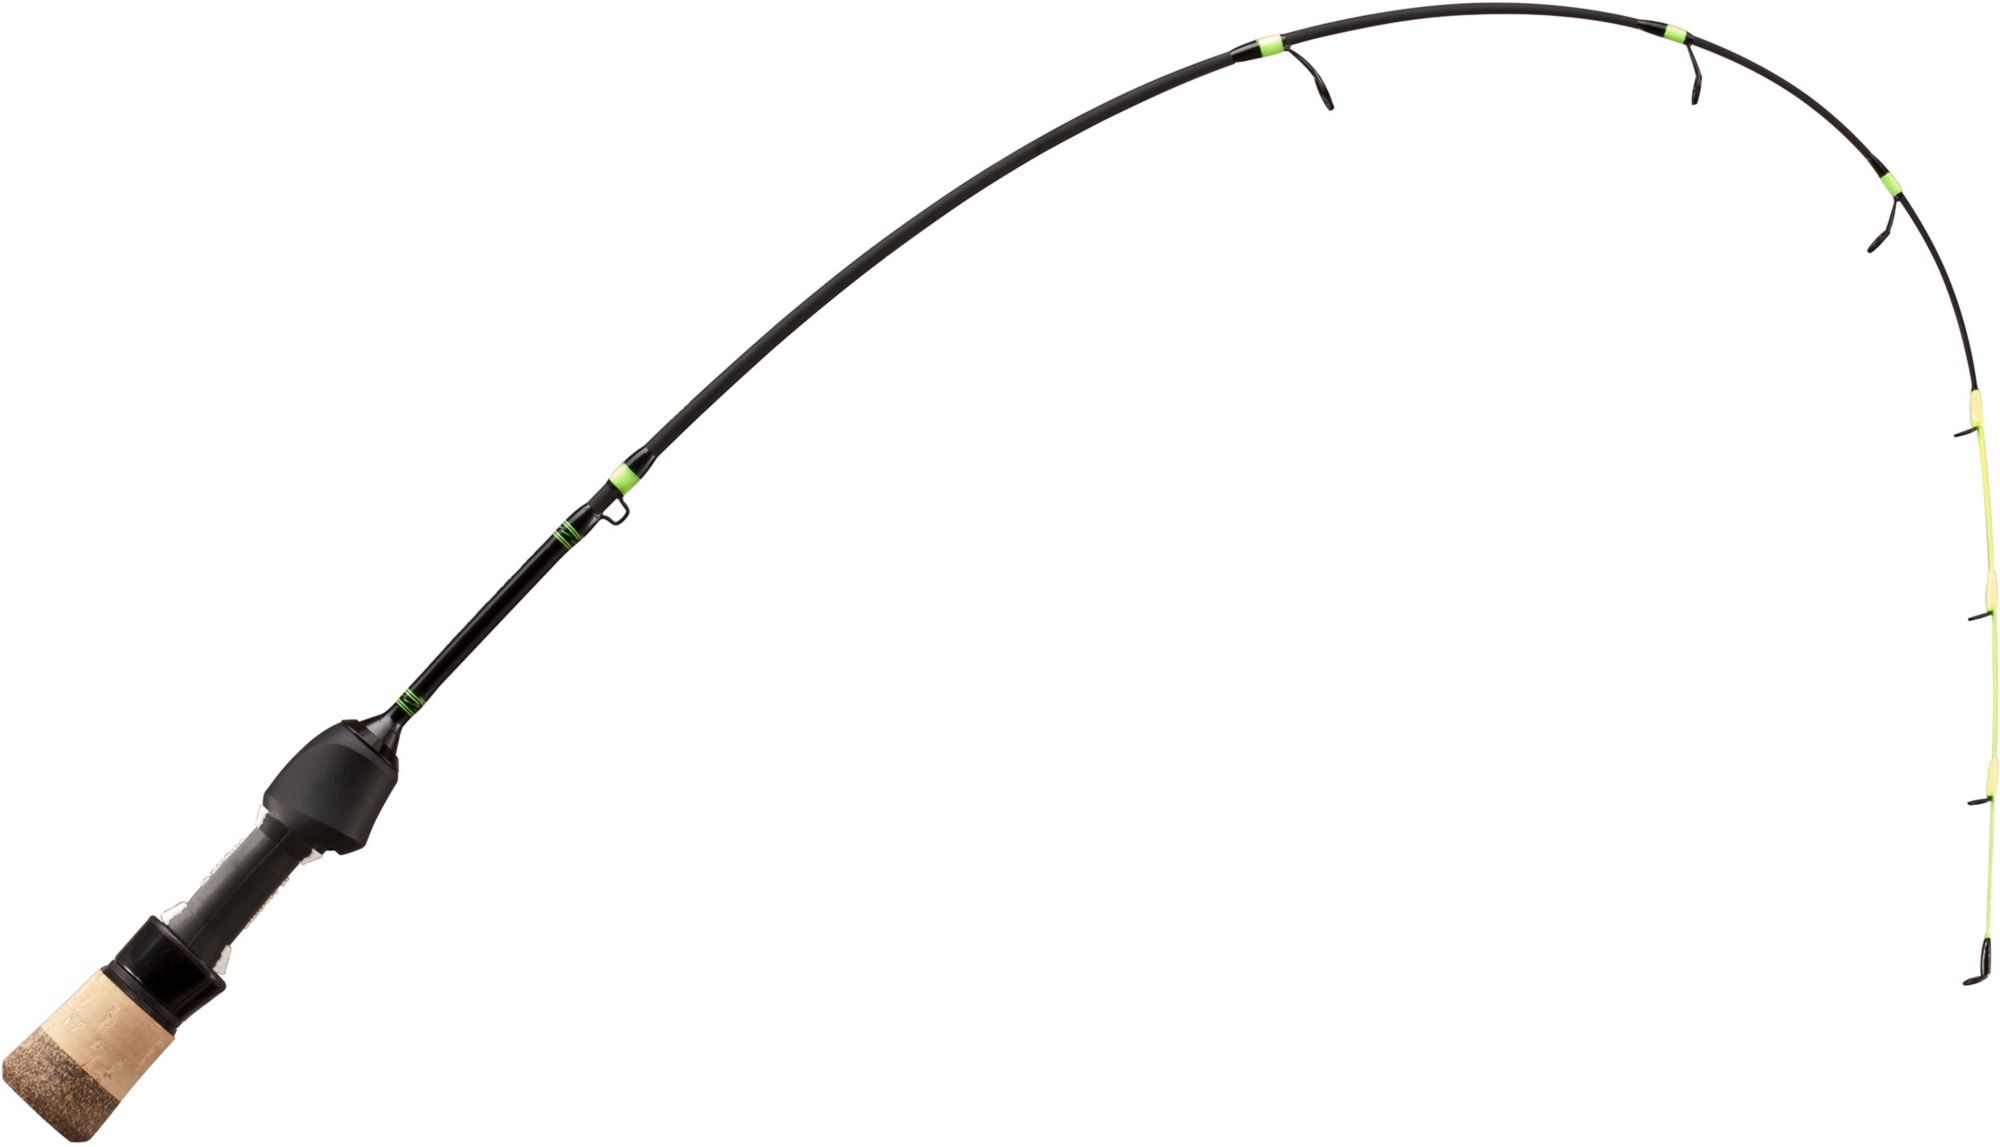 Dick's Sporting Goods 13 Fishing Tickle Stick 3 Ice Rod